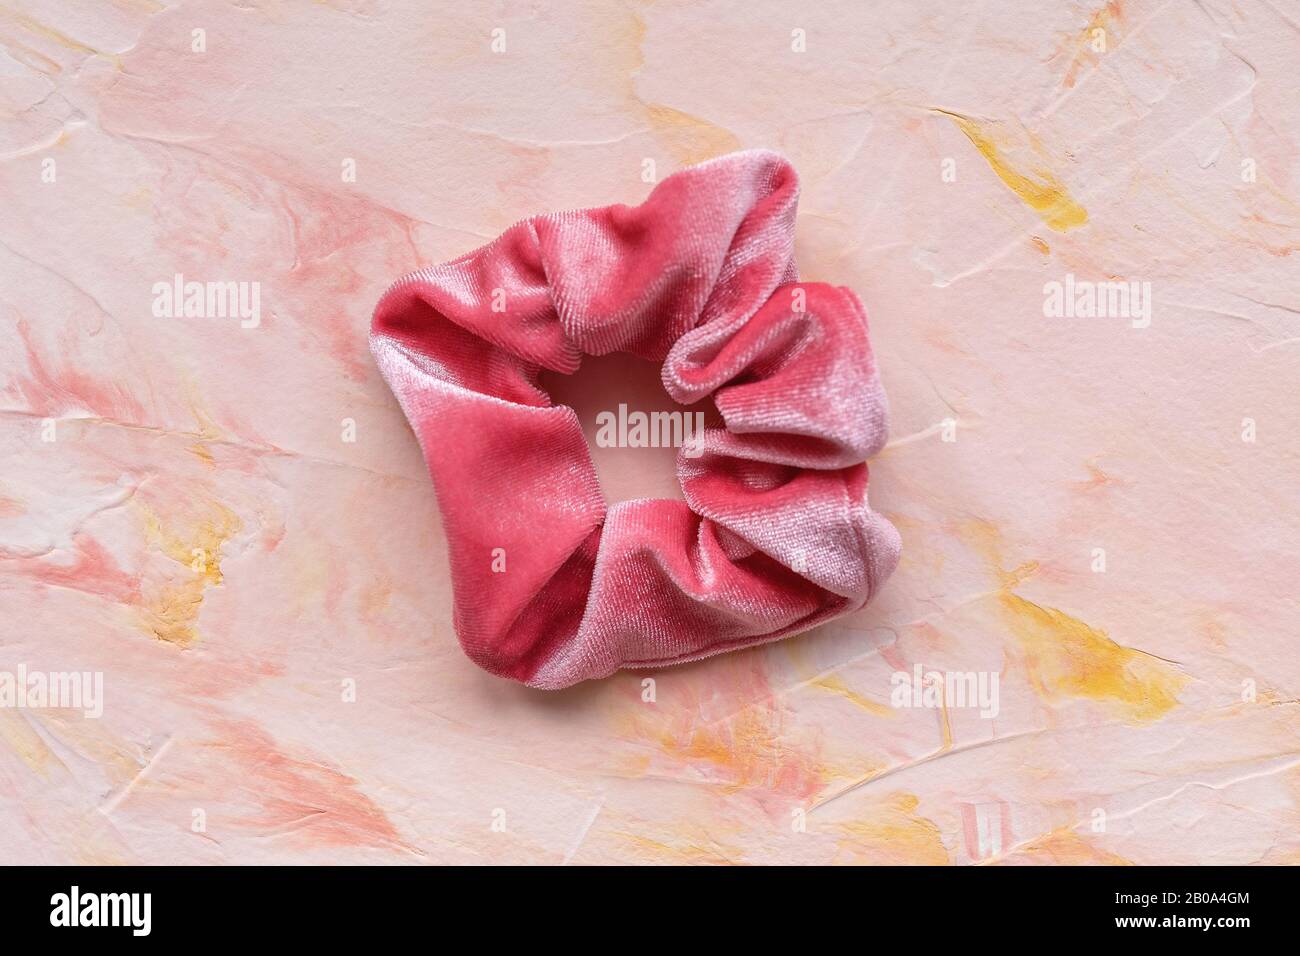 One pink trendy velvet scrunchie on pastel background. Diy accessories and hairstyles concept, copy space Stock Photo